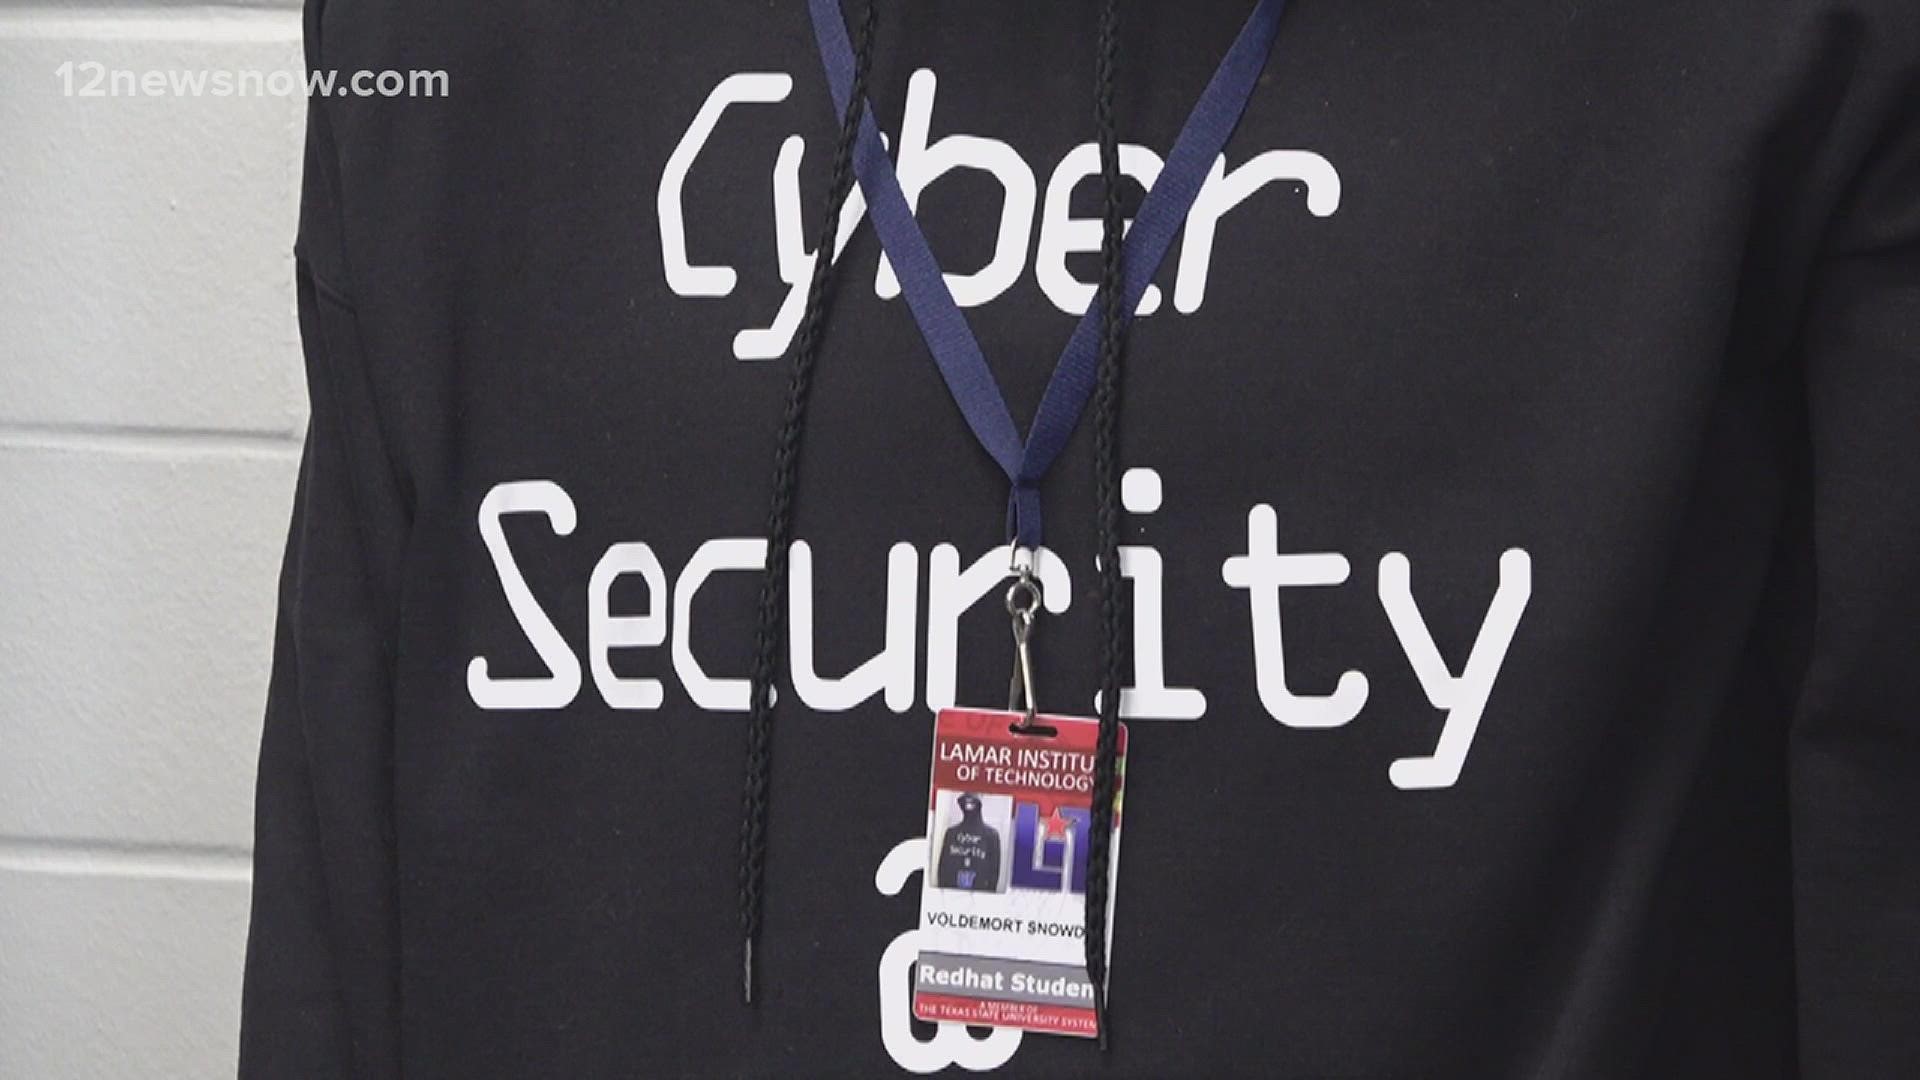 Southeast Texas cybersecurity experts said this Cyber Monday, there are new worries about privacy as online hackers have become more active and aggressive.